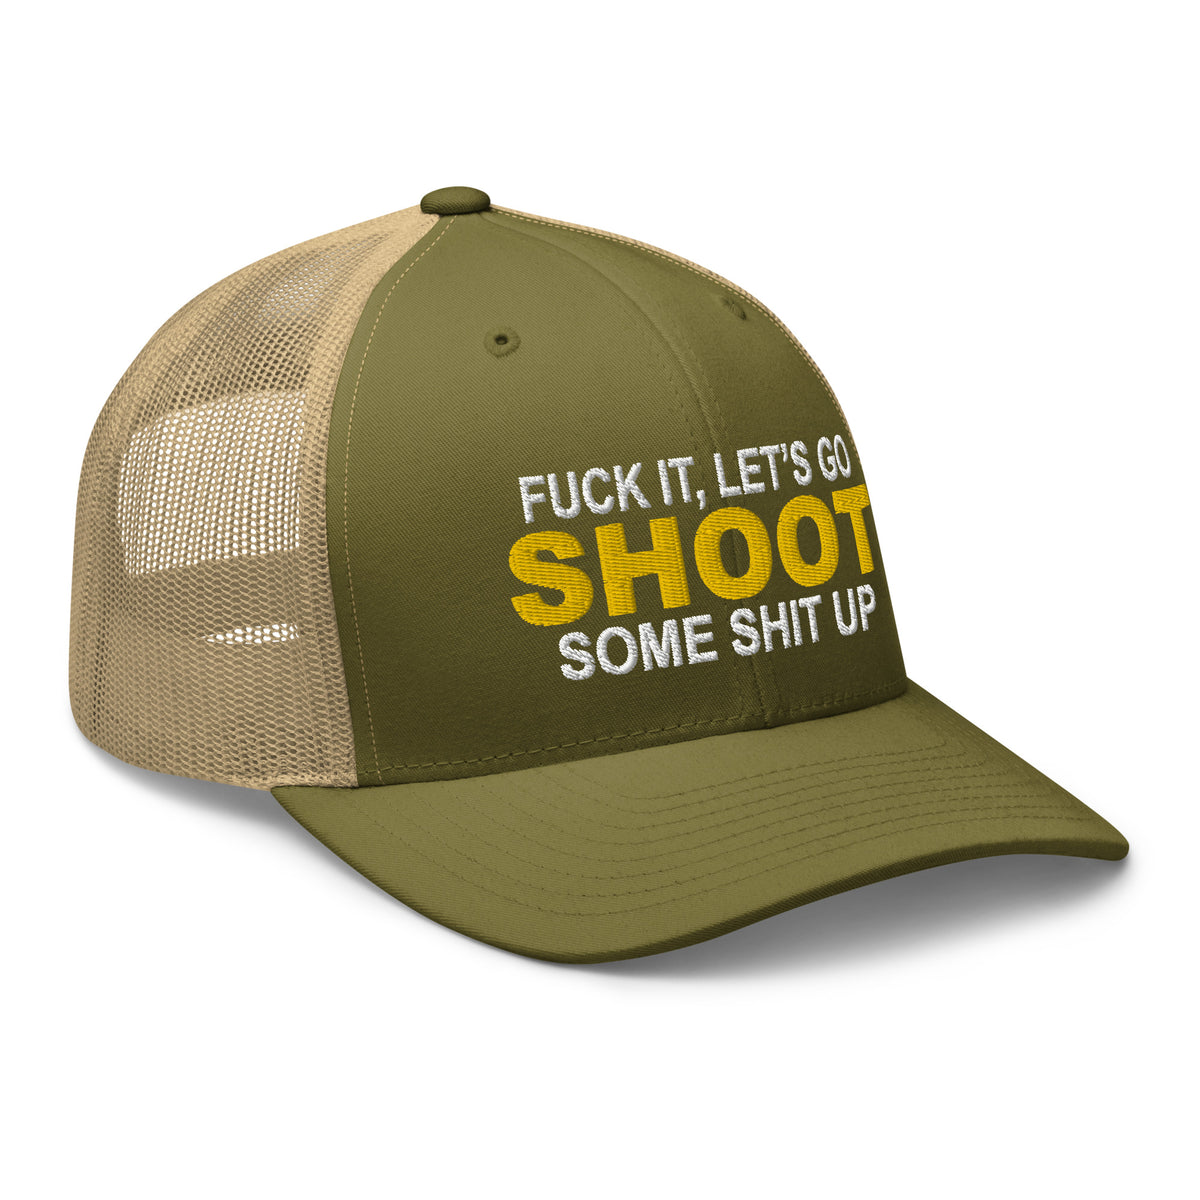 Fuck It, Let's Go Shoot Some Shit Up - Snapback Hat - Free Shipping